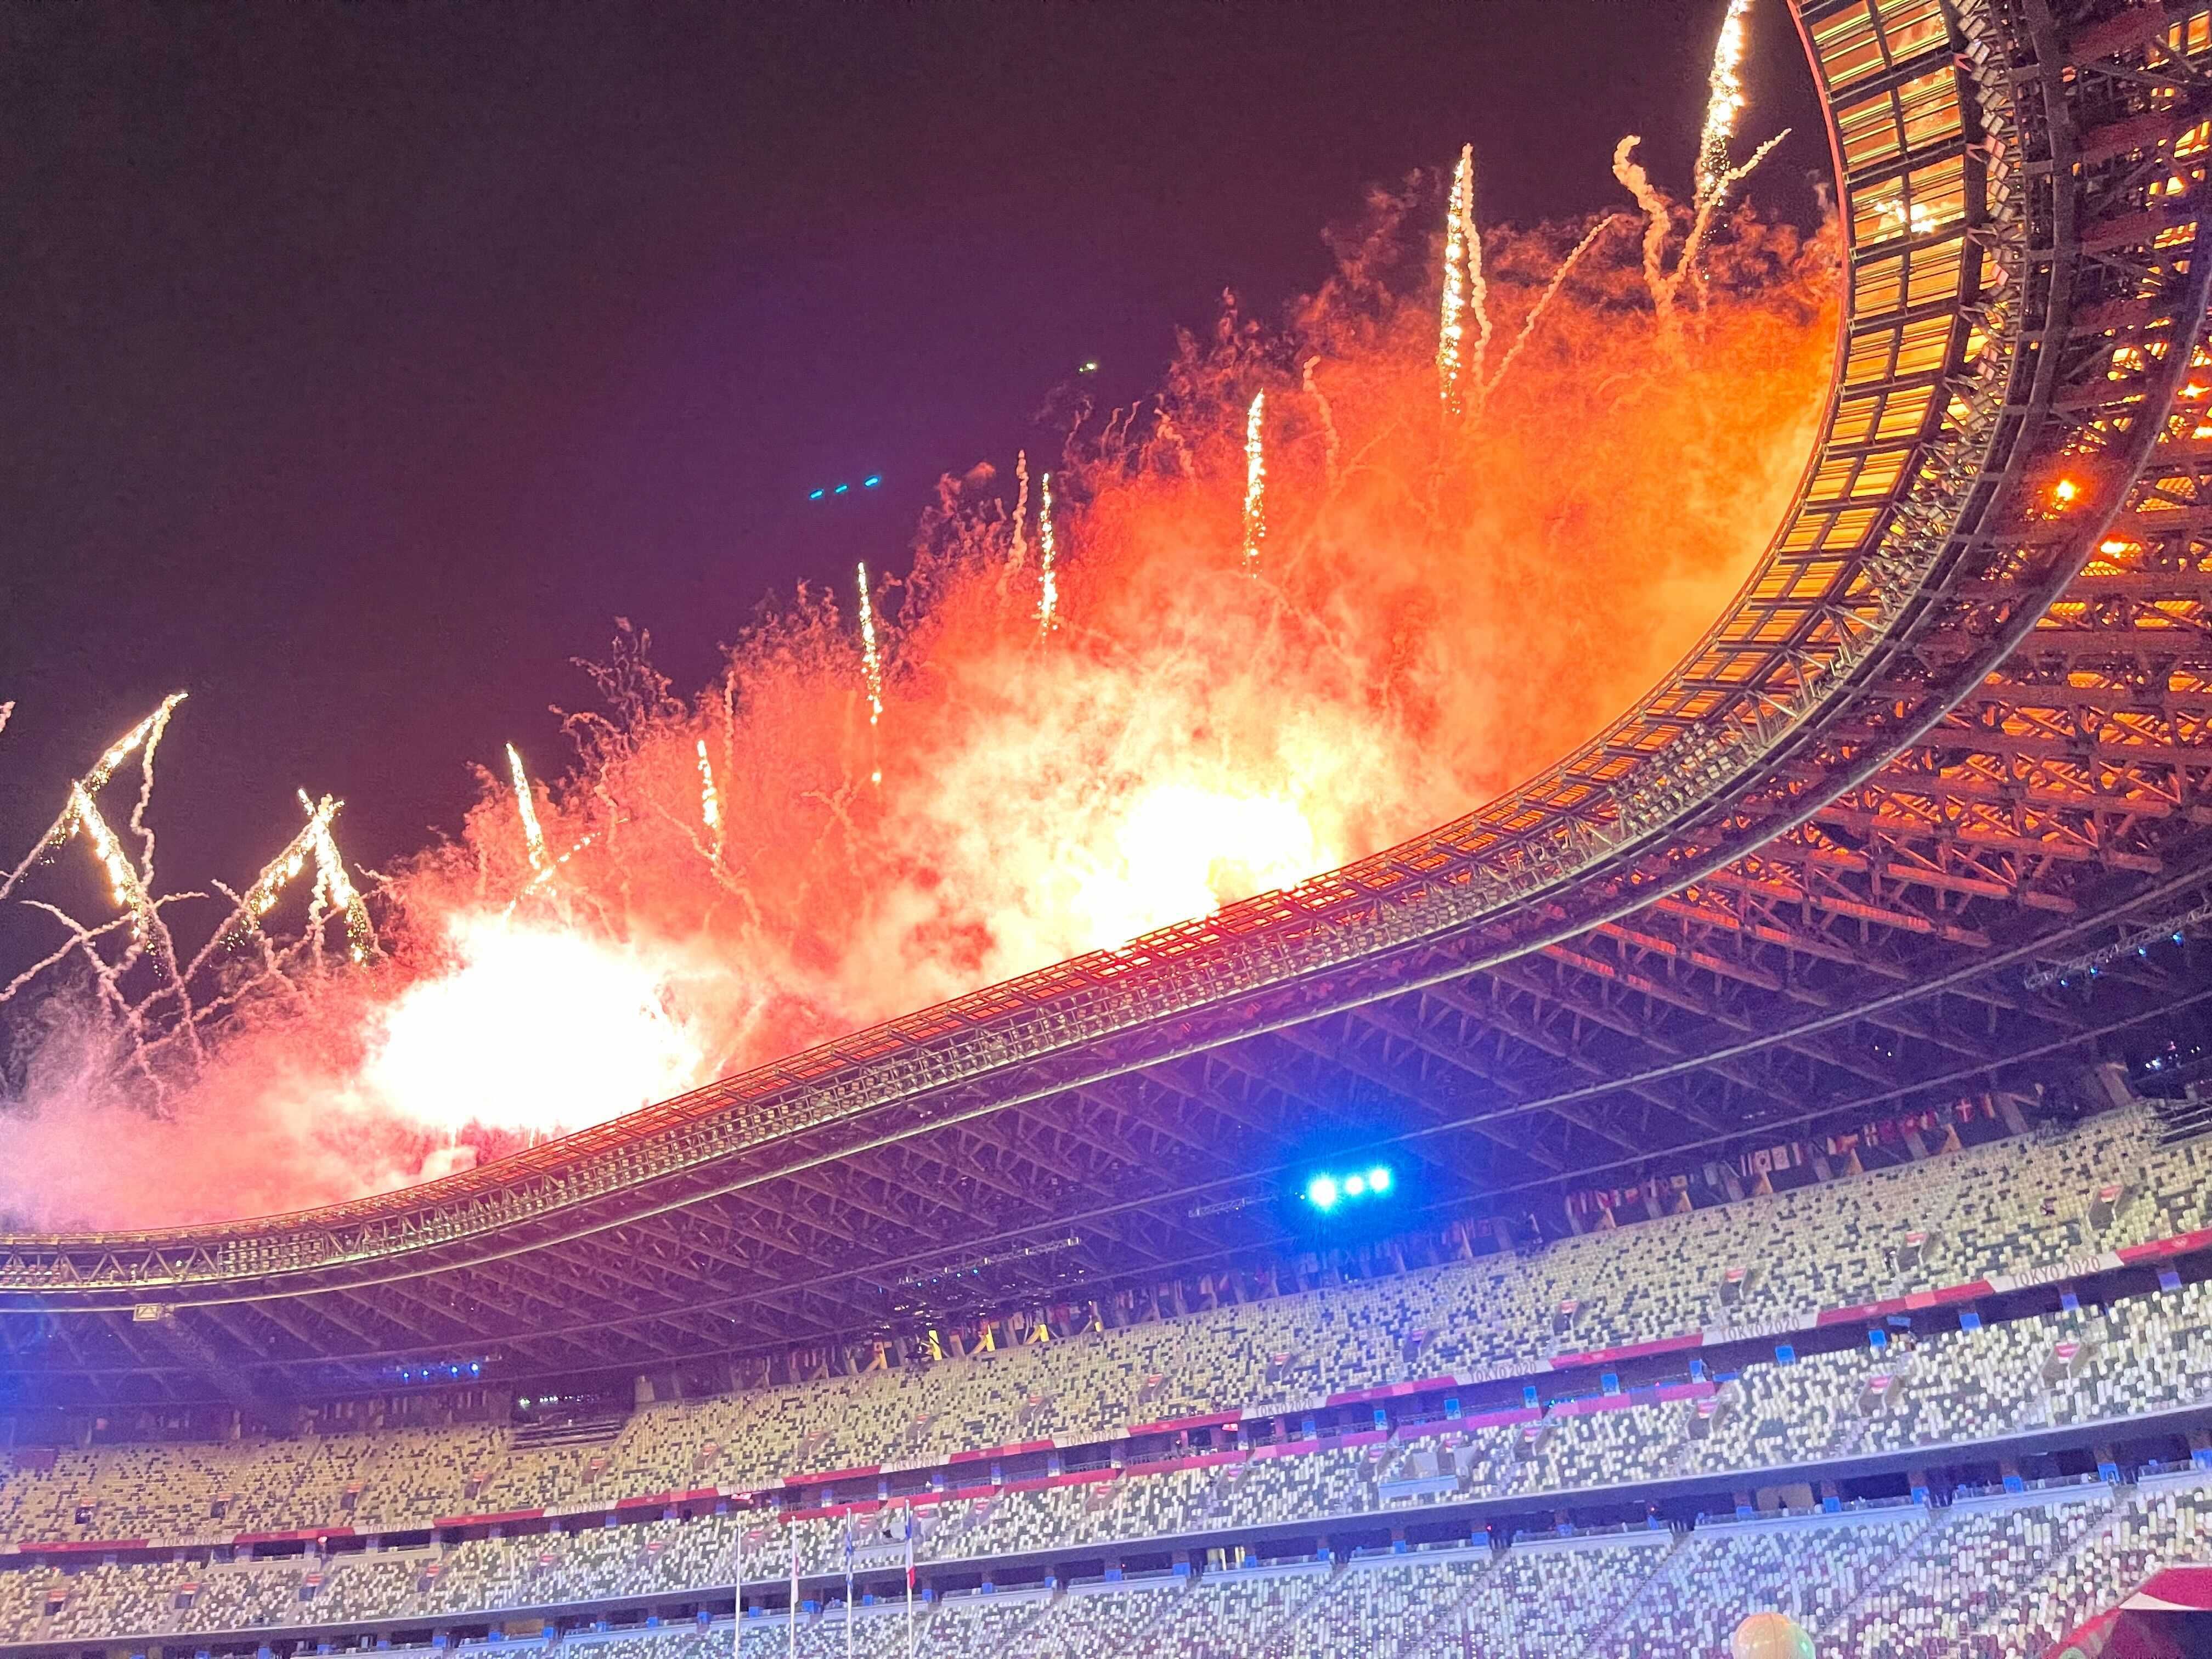 Fireworks at the olympic stadium.